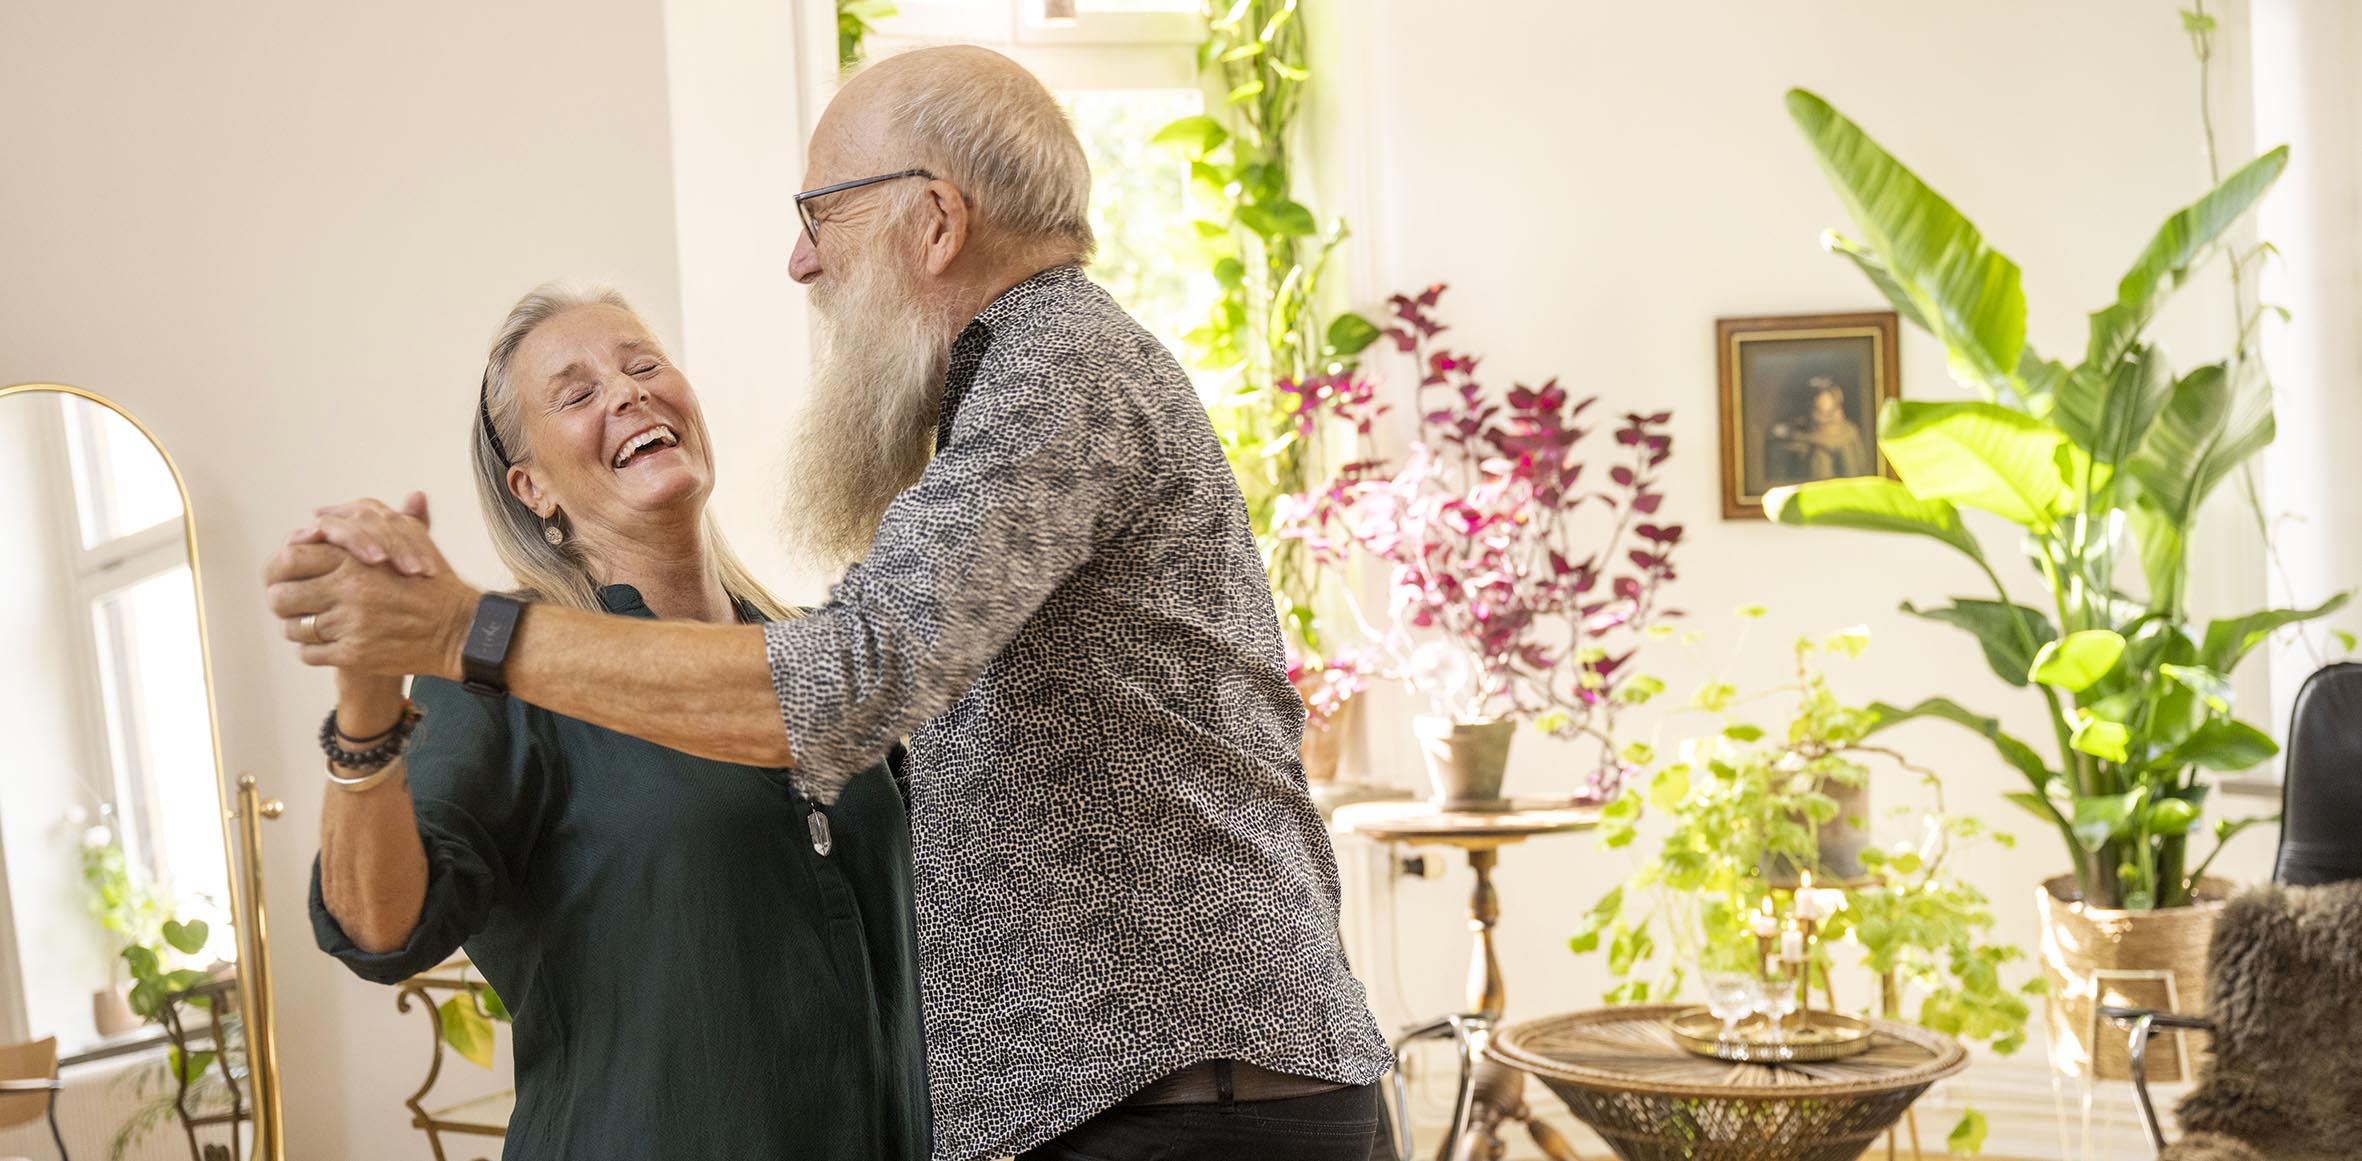 An older couple are dancing in their living room with green plants and white walls